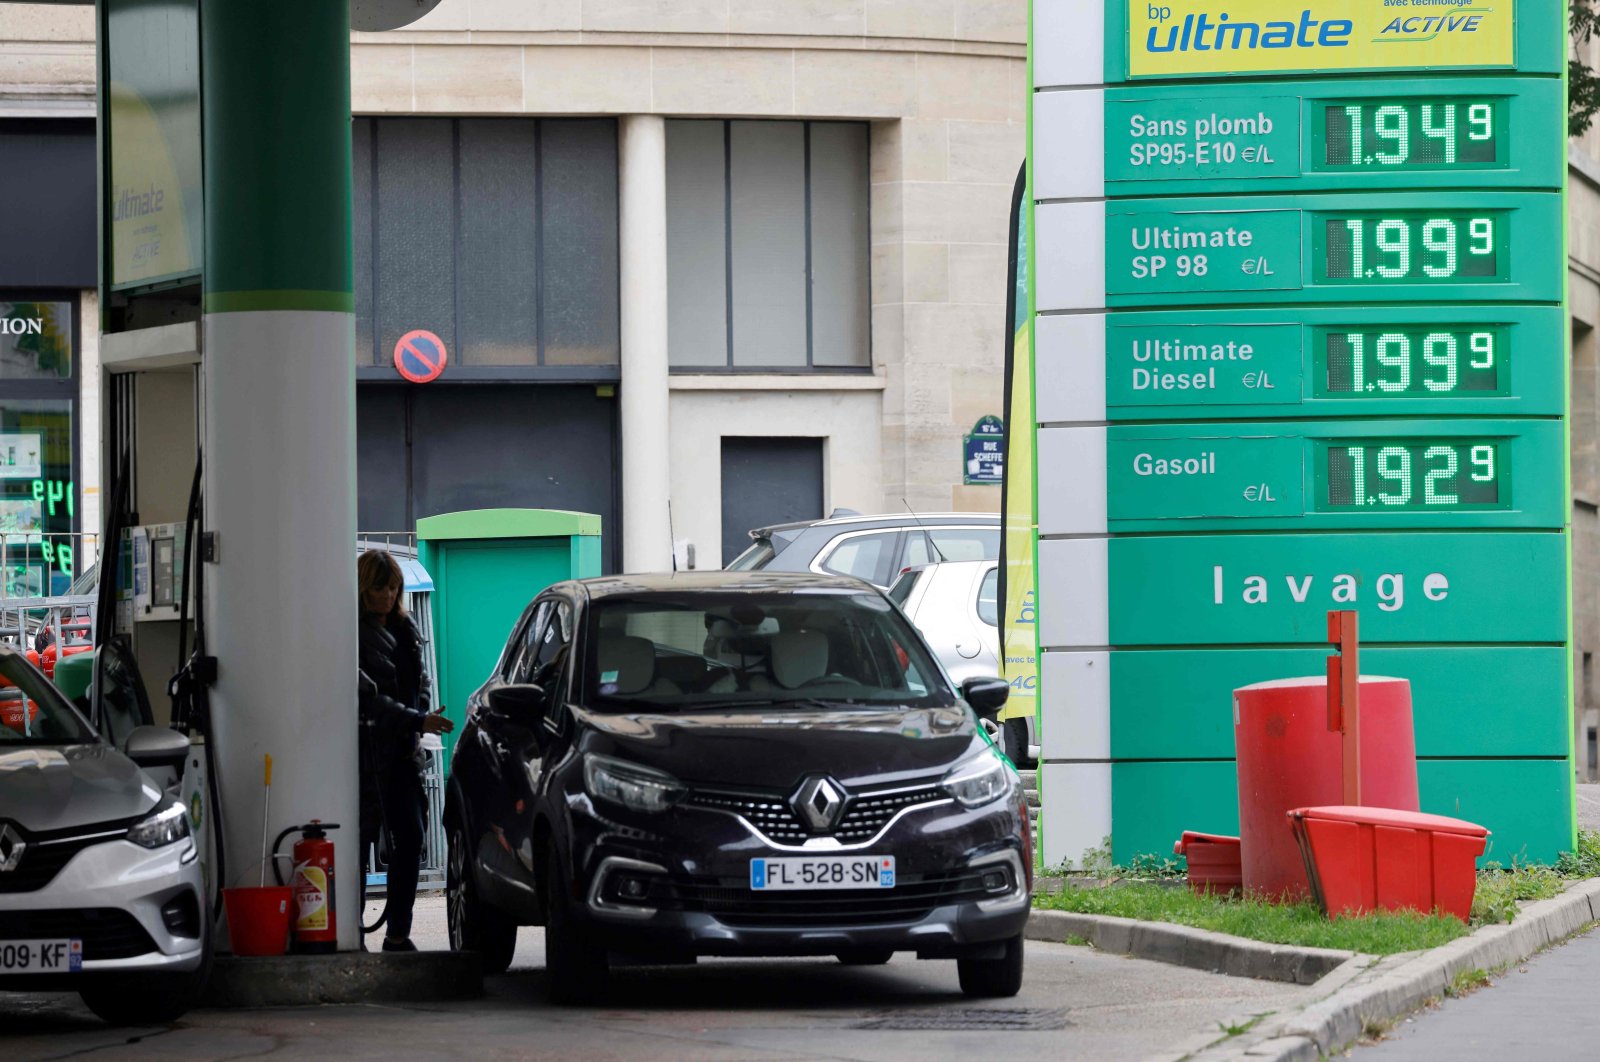 A gas station in Paris where fuel prices rose to nearly 2 euros per liter amid soaring global energy prices as economies bounce back from the effects of the coronavirus pandemic, Paris, France, Oct. 20, 2021. (AFP Photo)